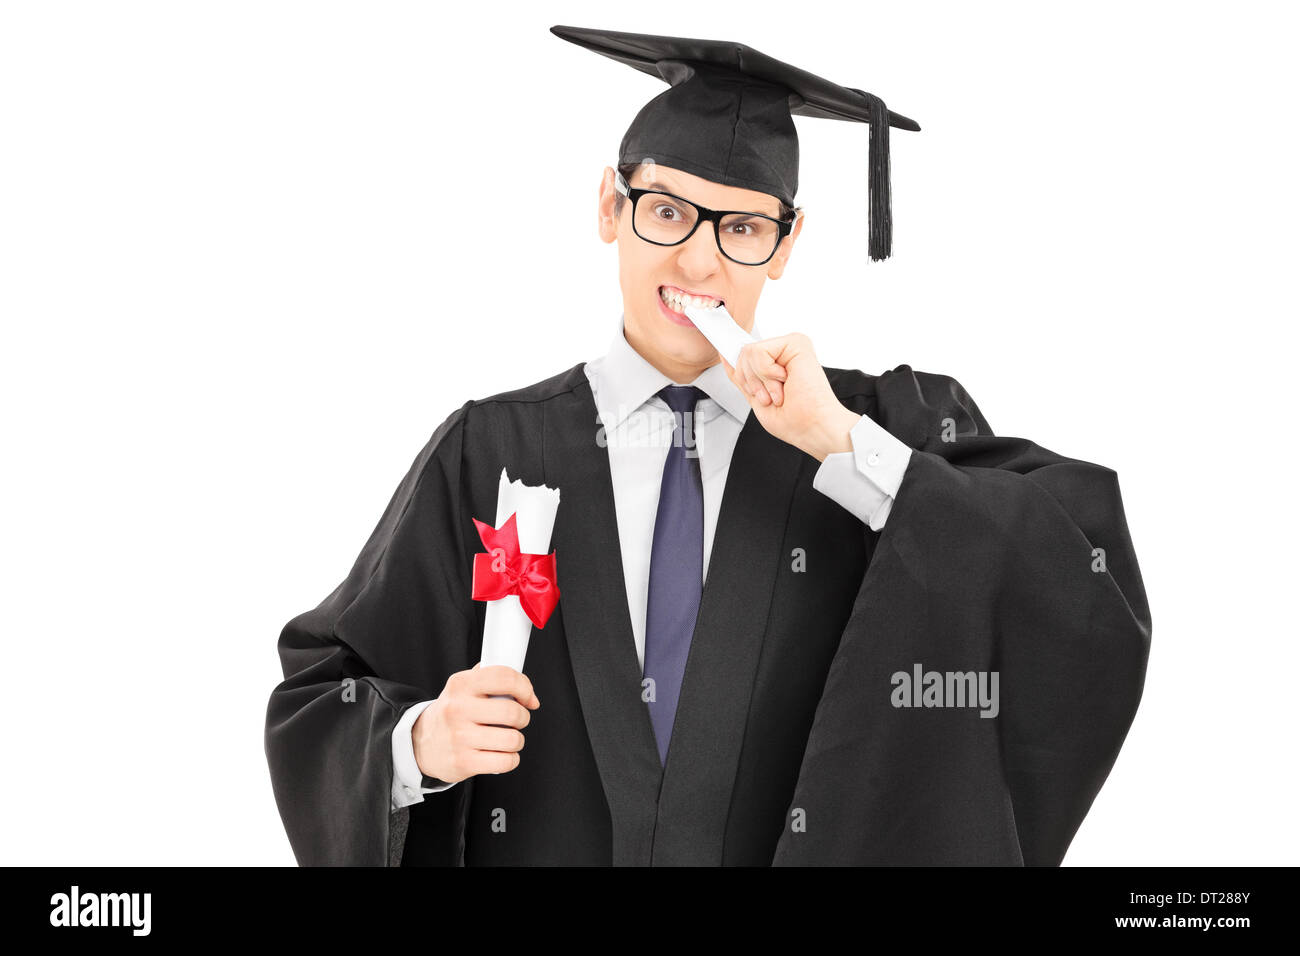 Male college graduate biting his worthless diploma Stock Photo